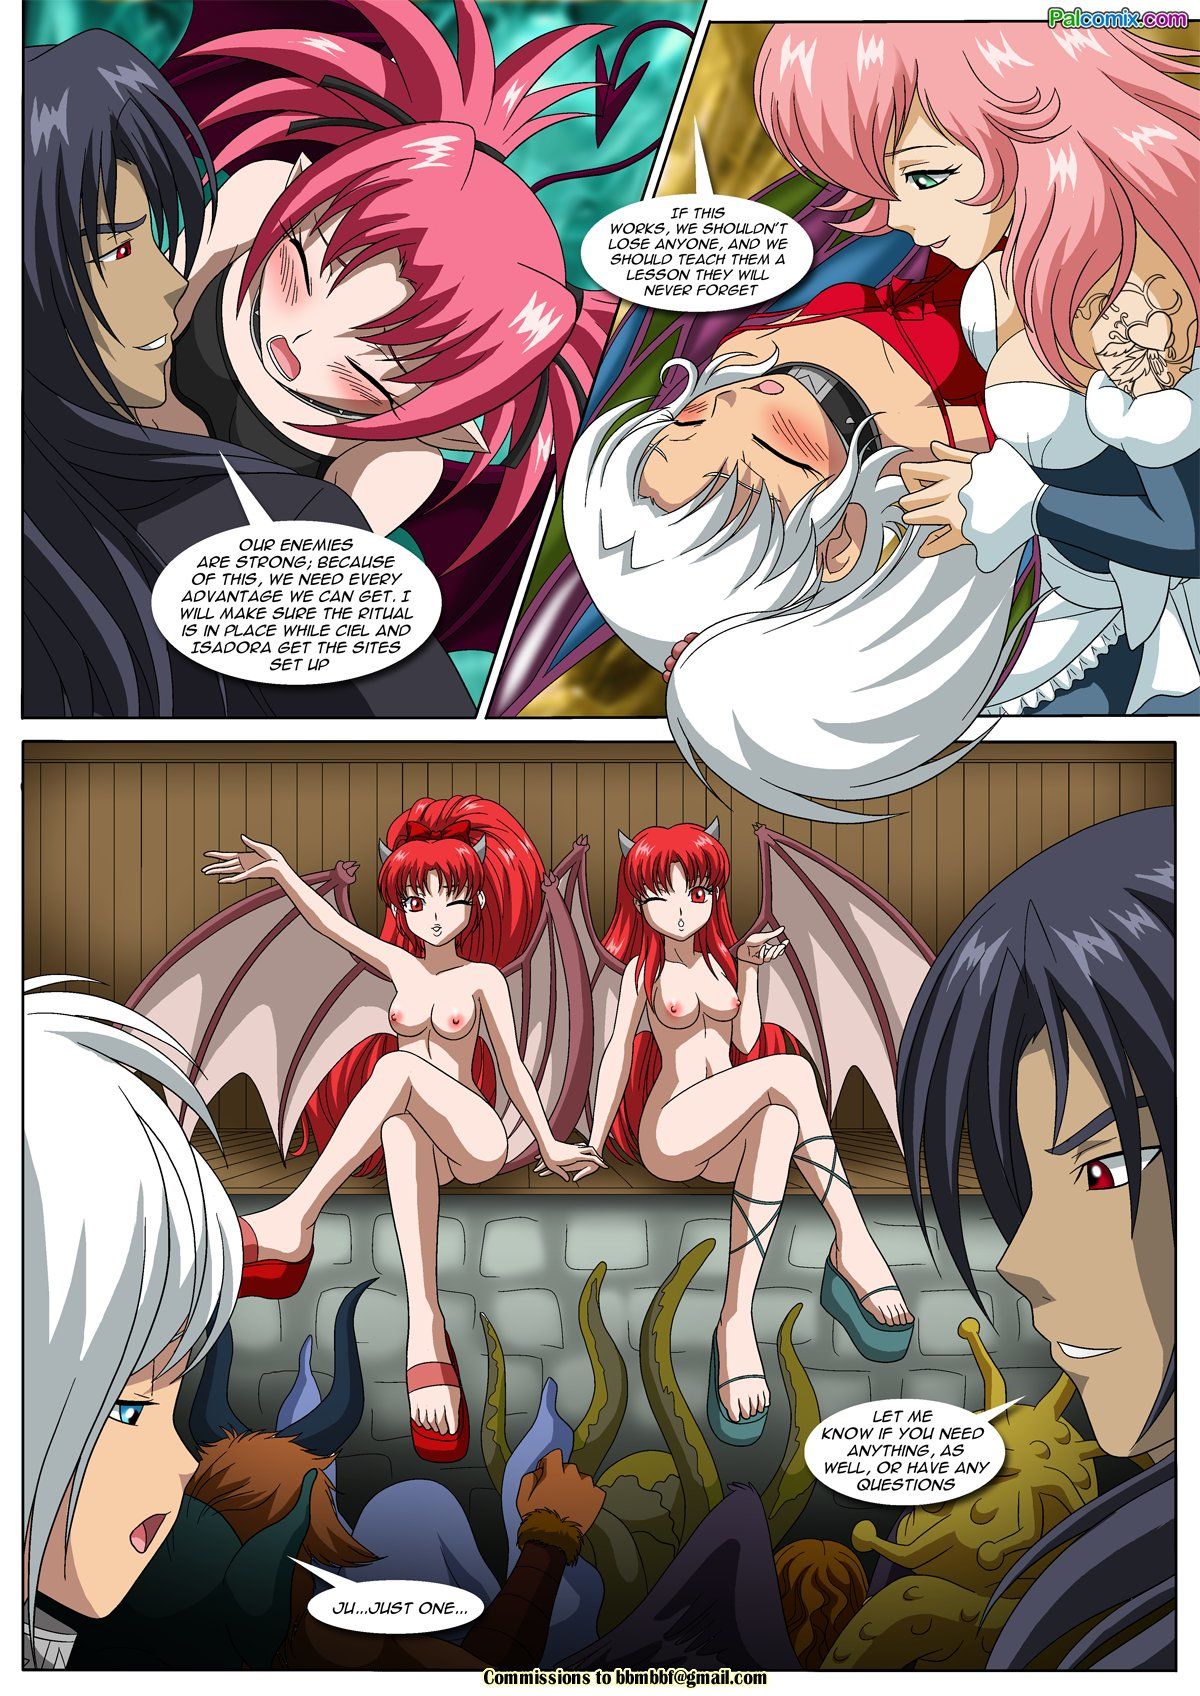 The Carnal Kingdom 6 - Angels and Demons page 10